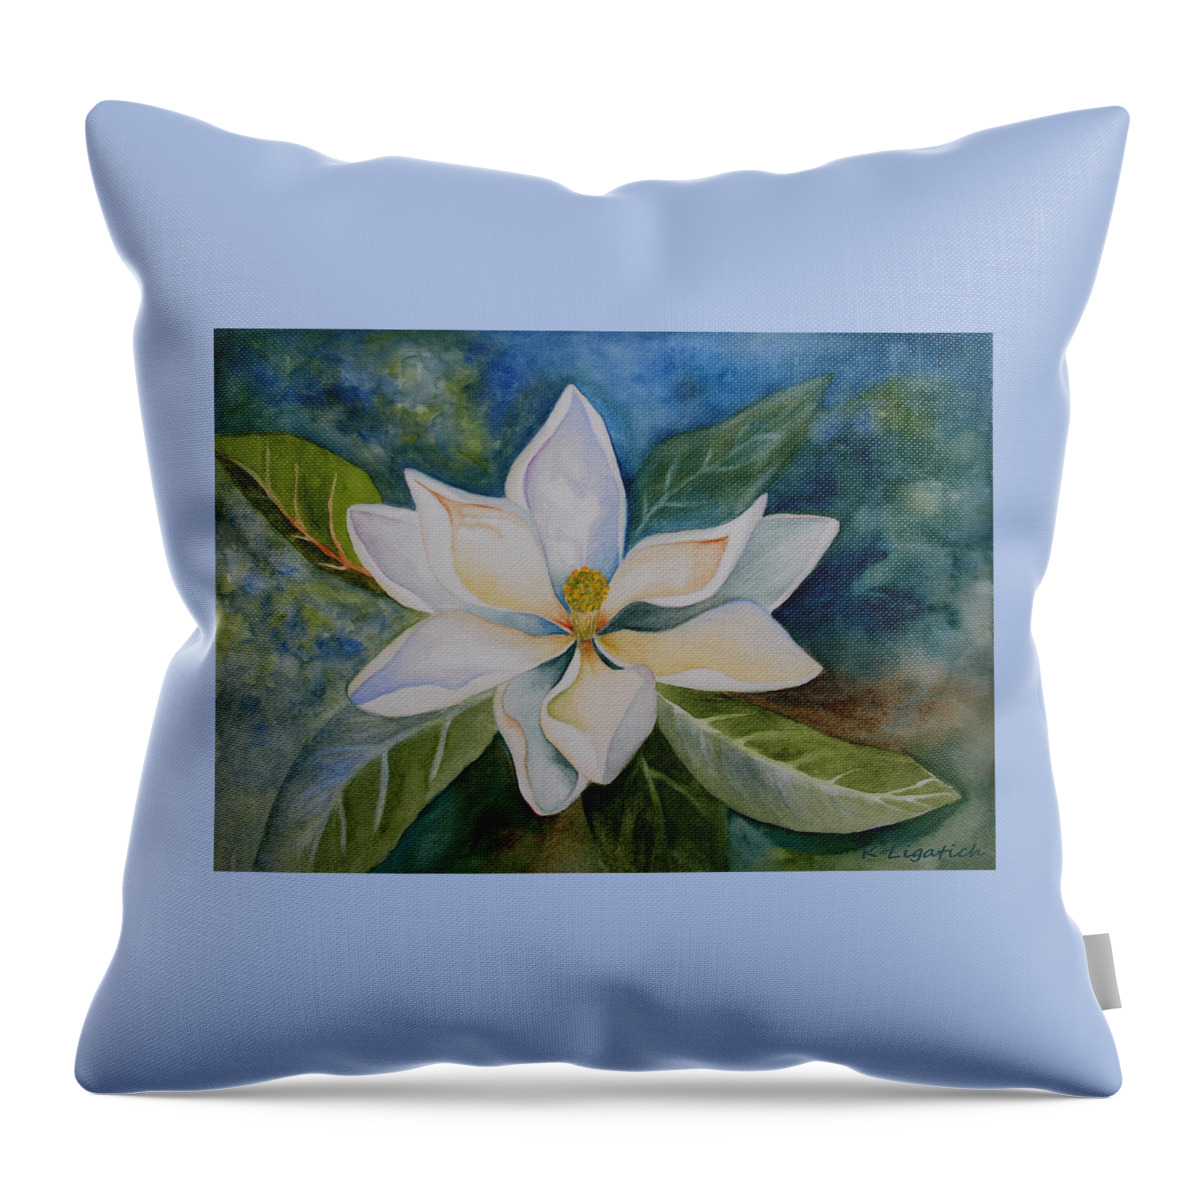 Magnolia Throw Pillow featuring the painting Magnolia by Kerri Ligatich